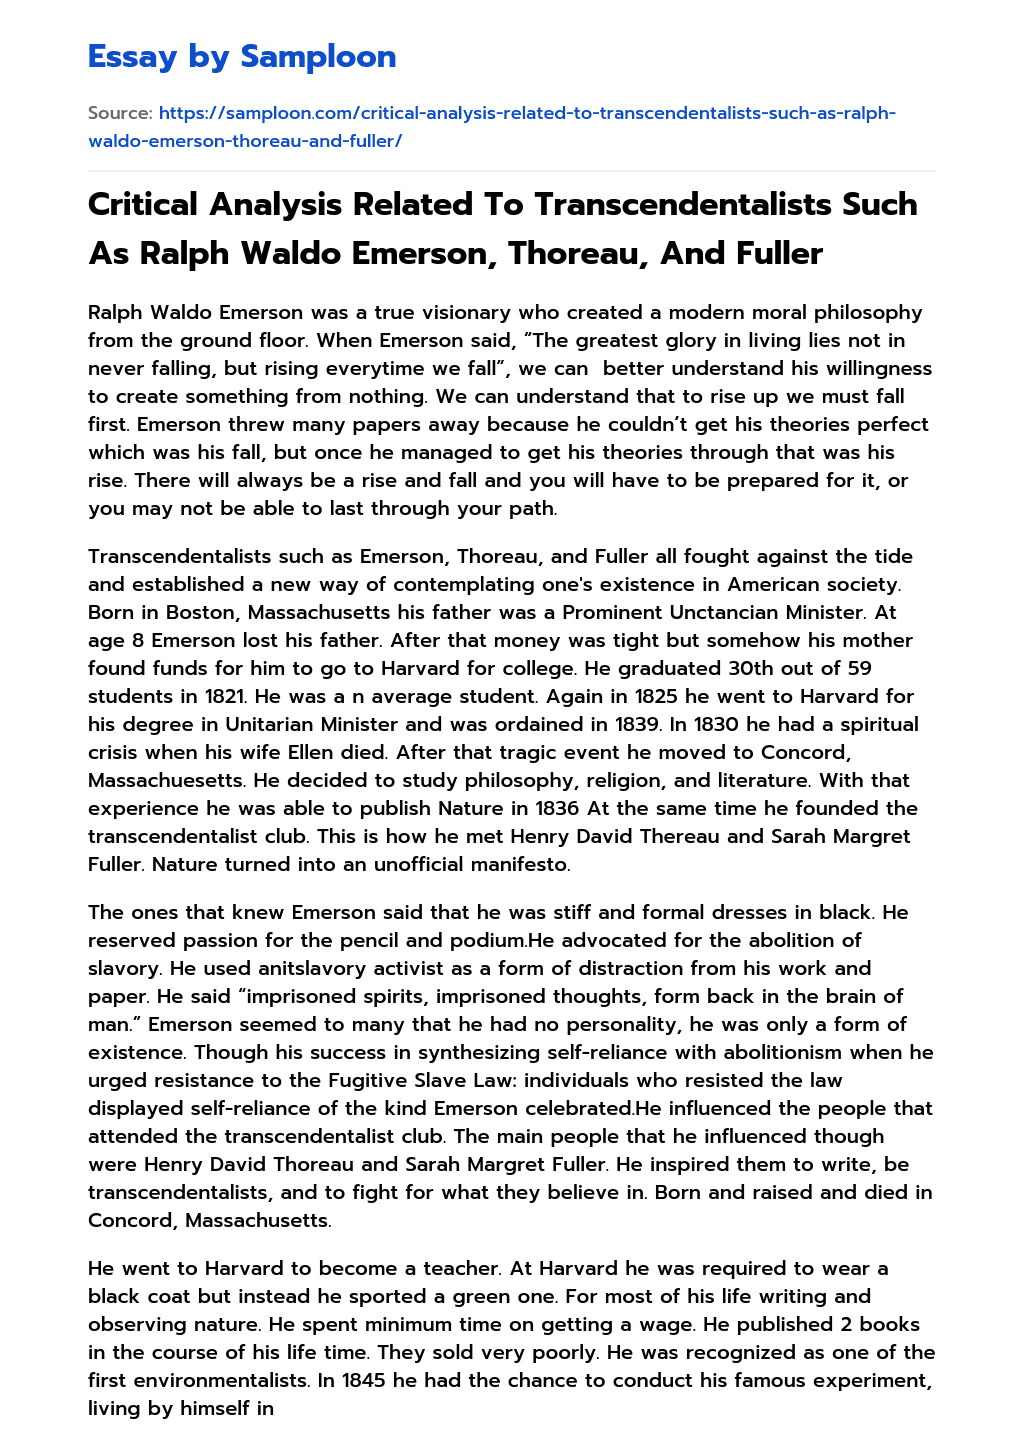 Critical Analysis Related To Transcendentalists Such As Ralph Waldo Emerson, Thoreau, And Fuller essay